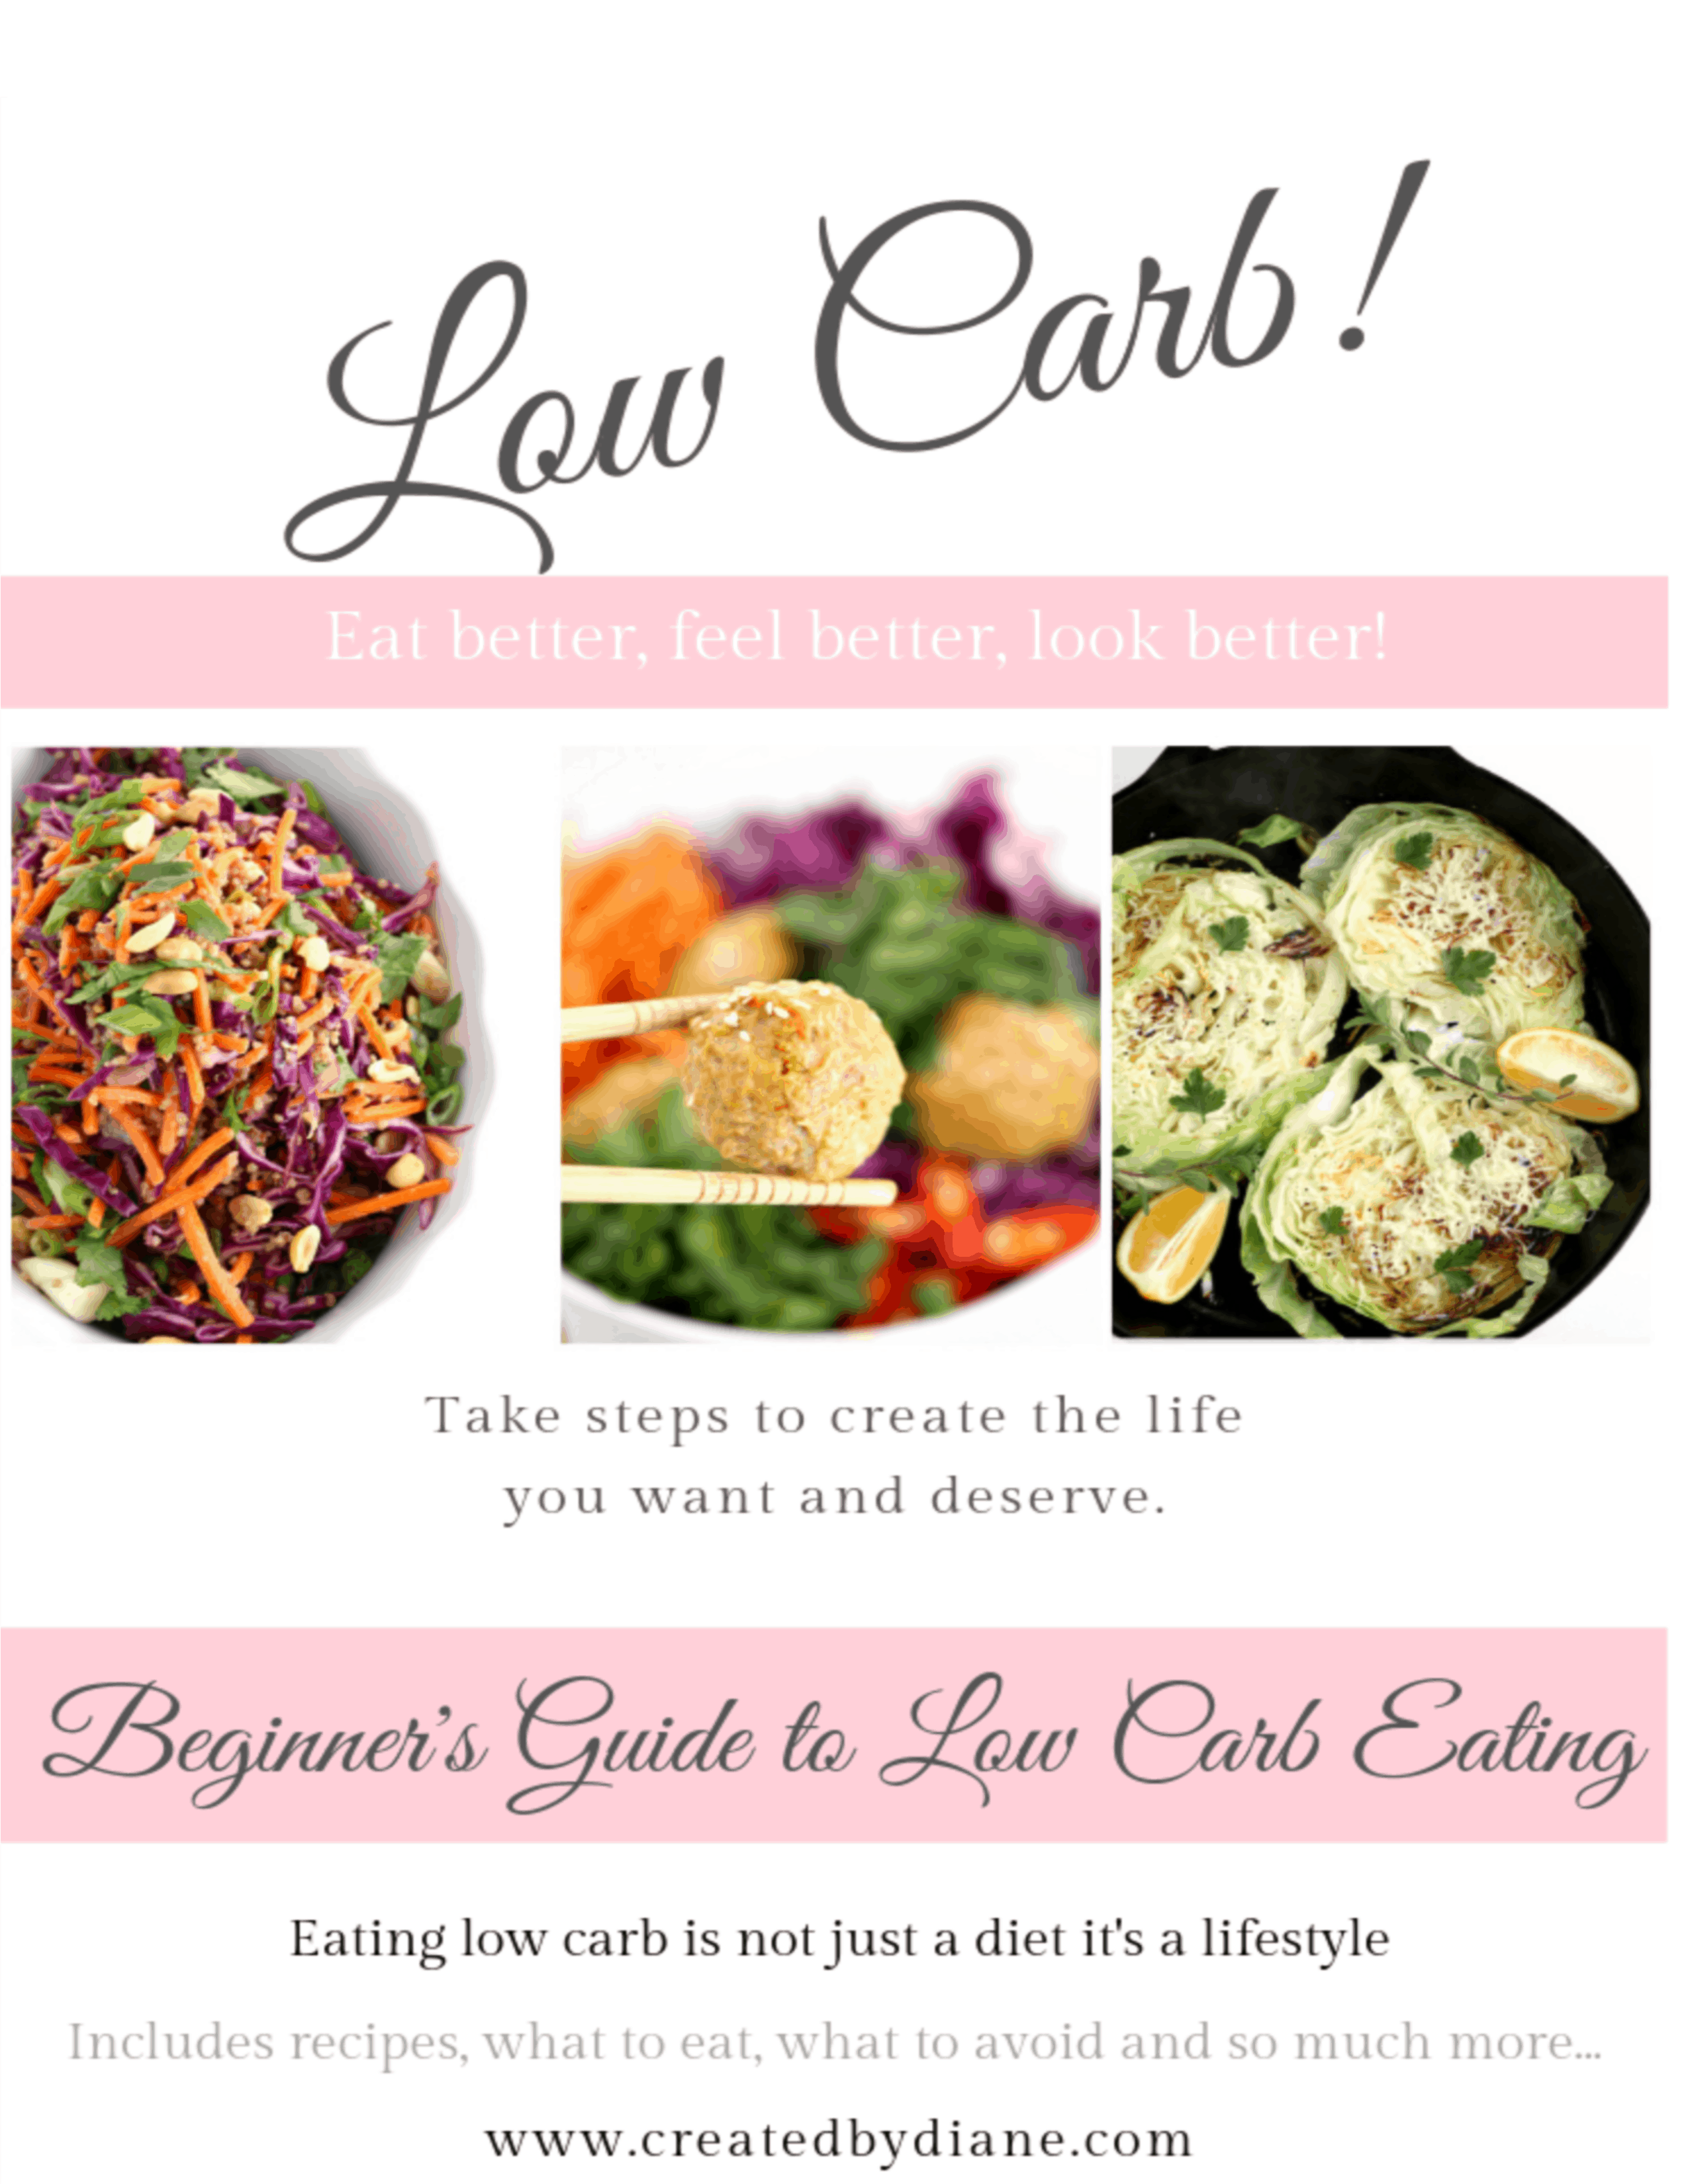 NEW! Low Carb Guide